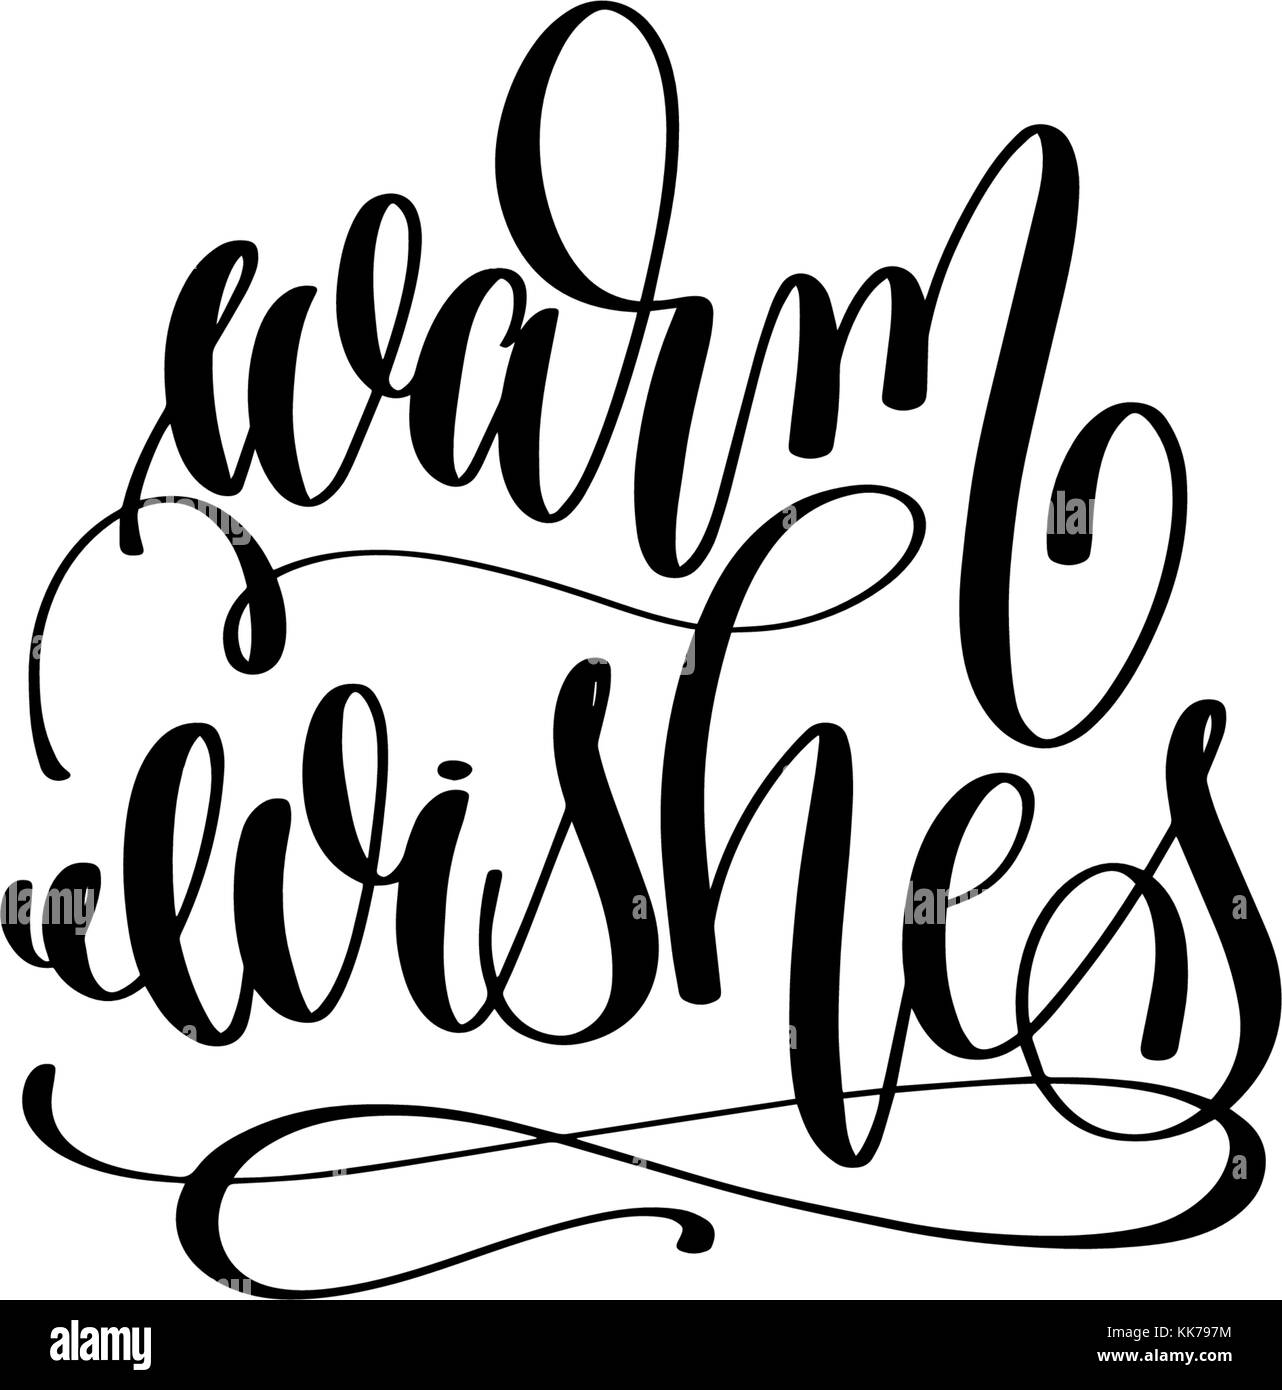 warm wishes - hand lettering black ink phrase to christmas holid Stock ...